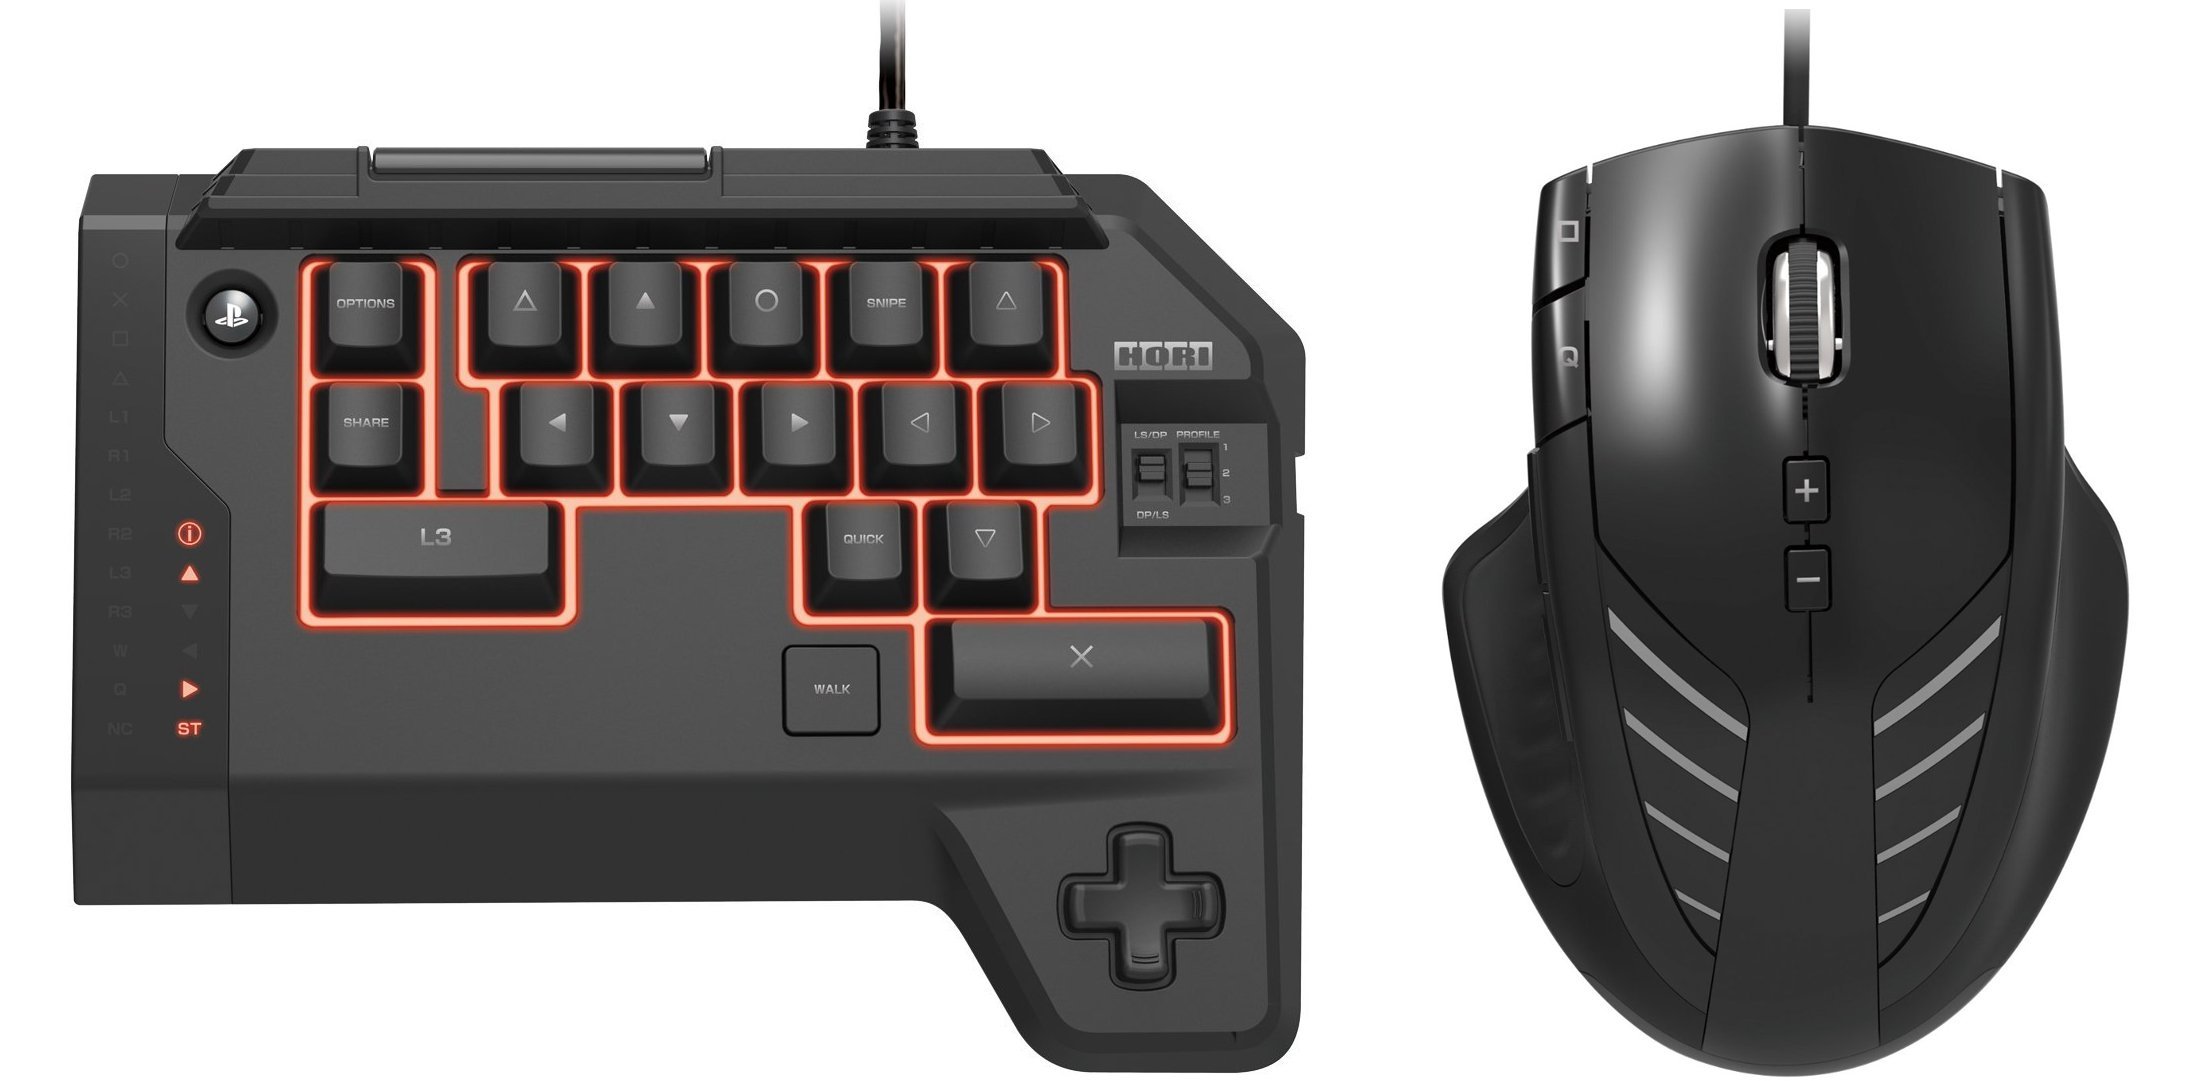 Hori PS4 Keyboard and Mouse Incoming Soon